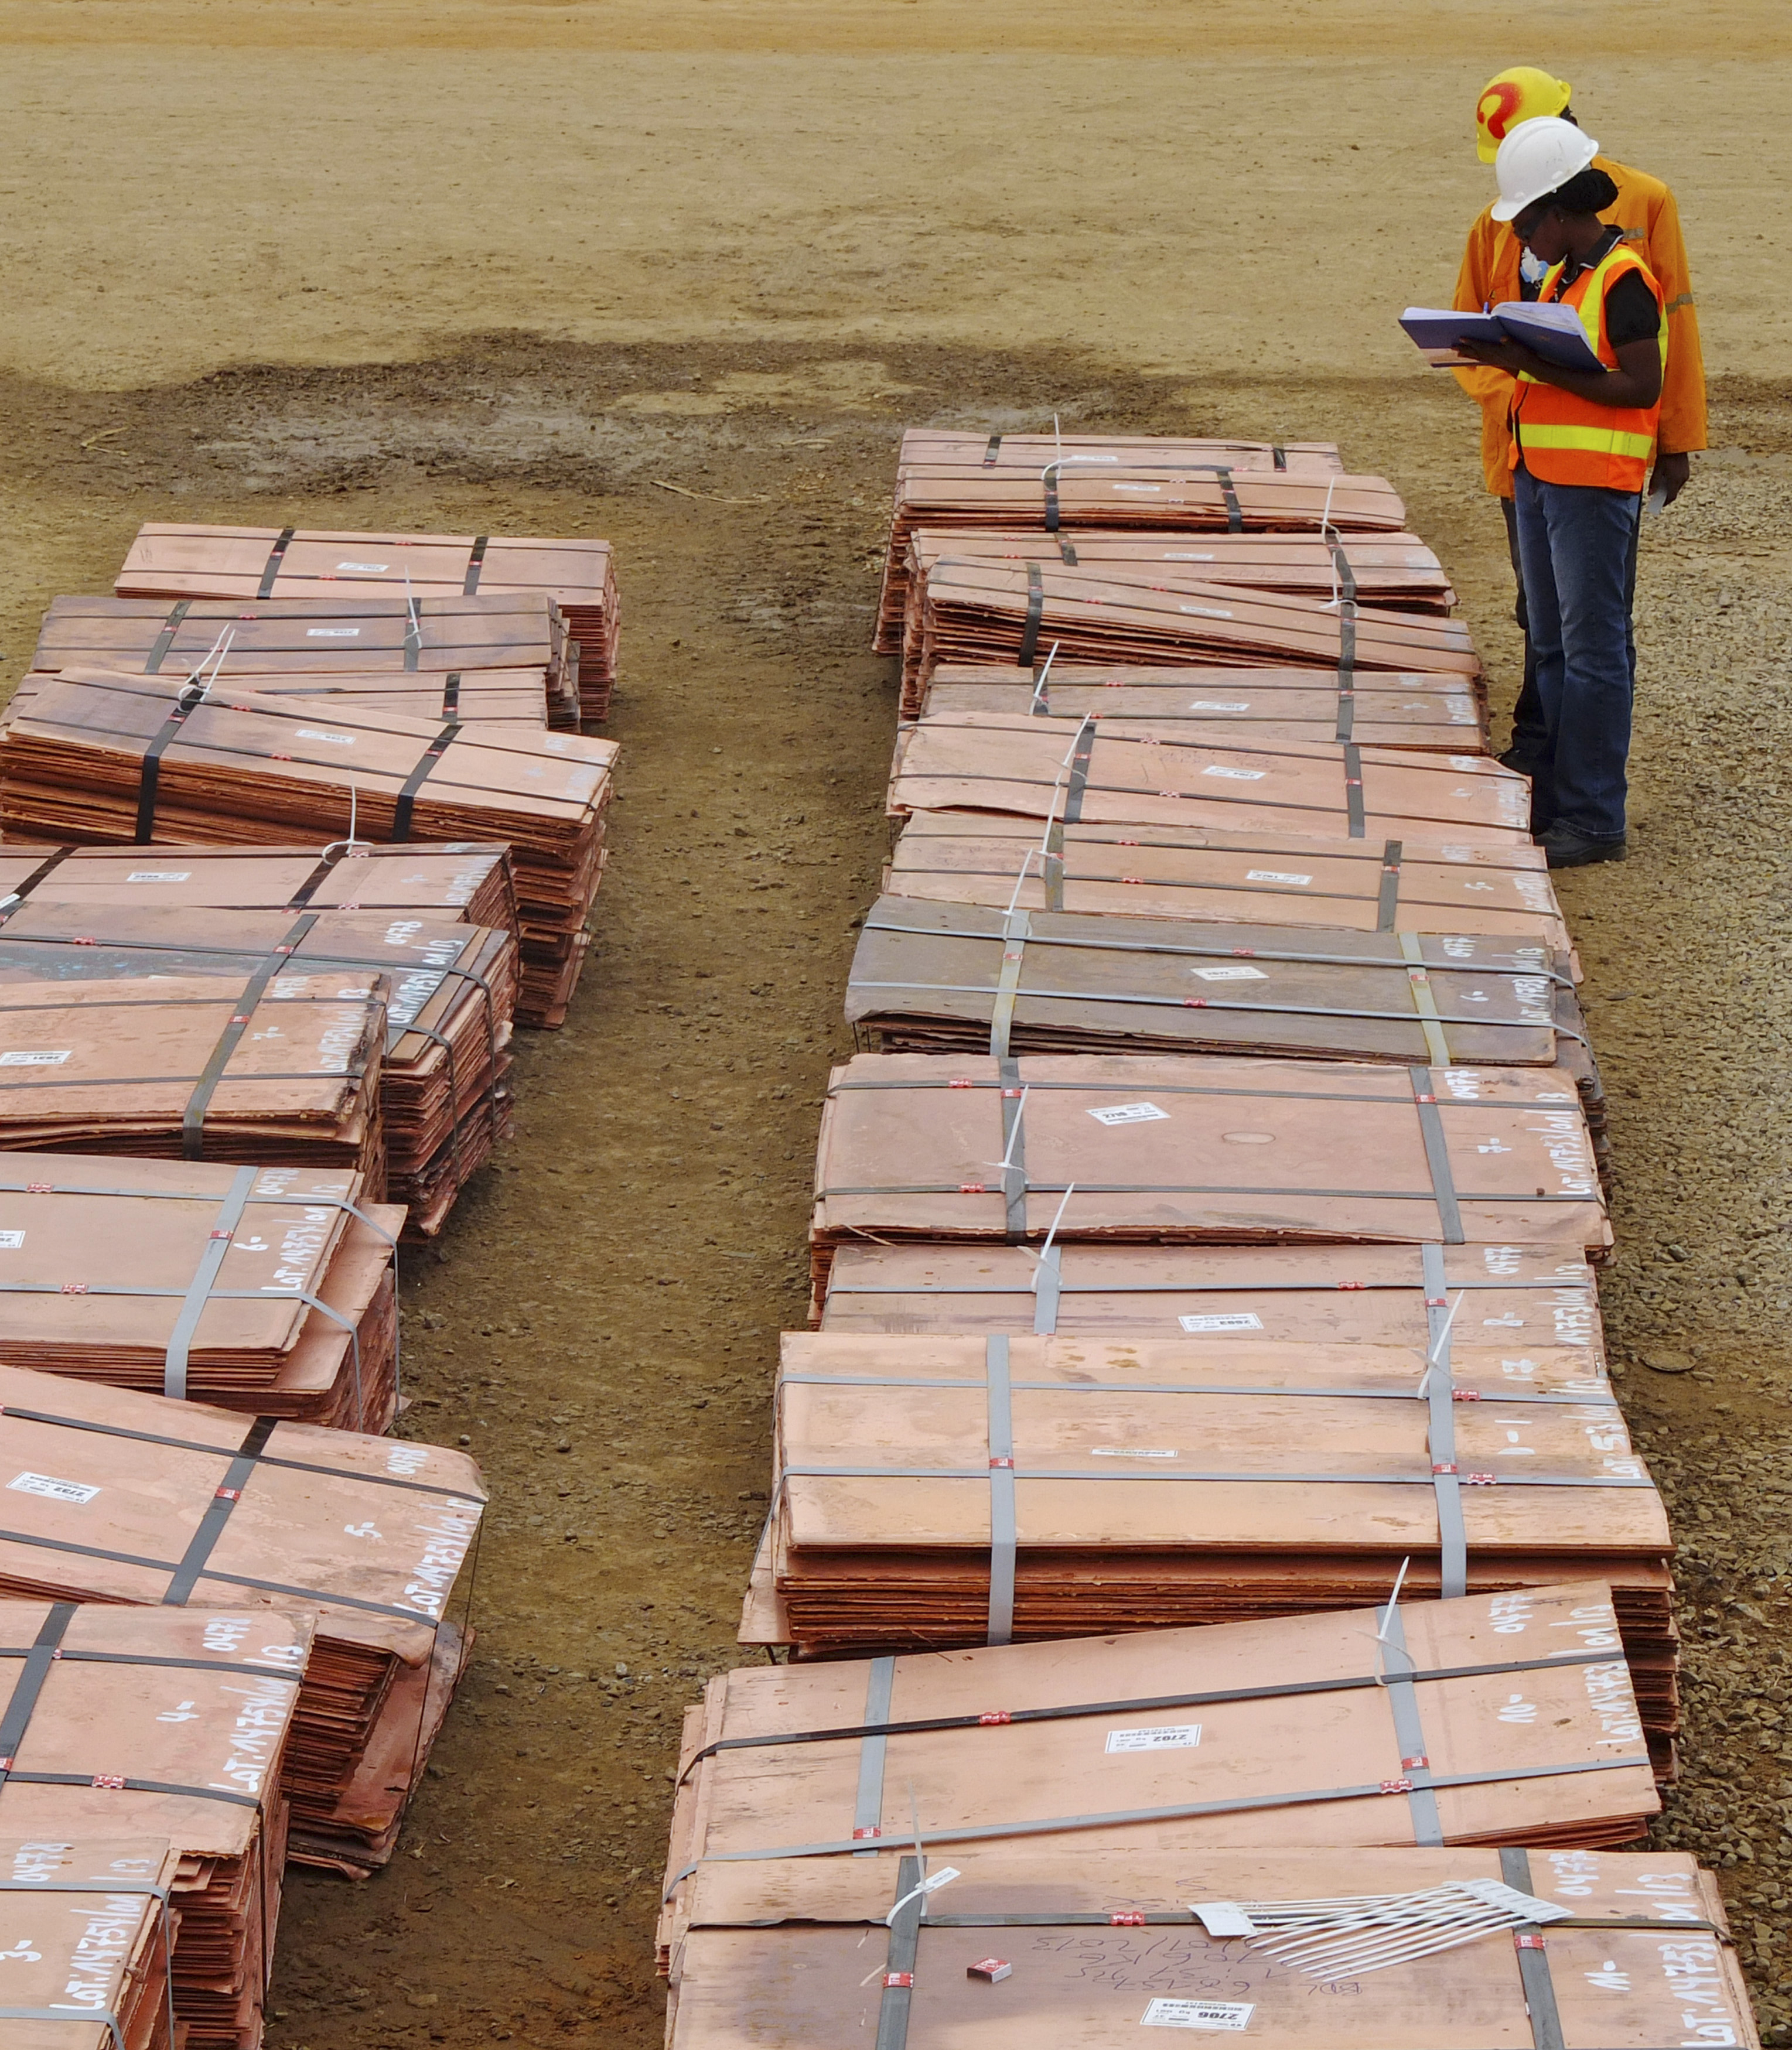 Workers at Tenke Fungurume, a copper mine in the southern Congolese province of Katanga, check bundles of copper cathode sheets ready to be loaded and sent out to buyers